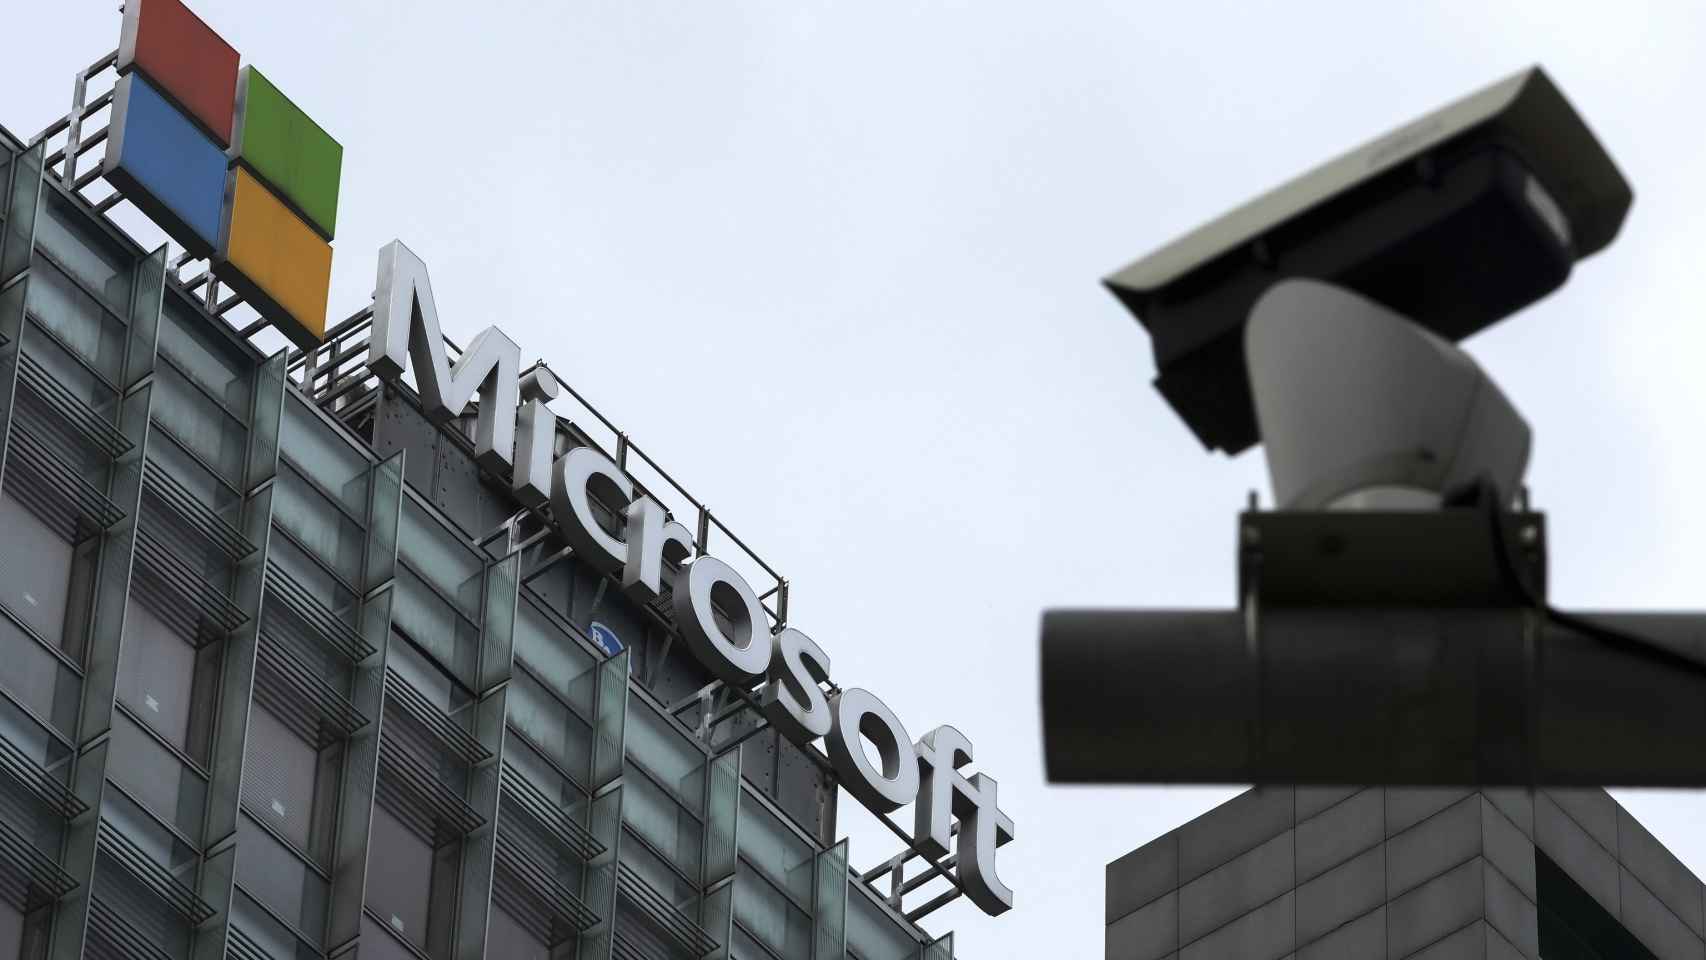 Microsoft headquarters in Beijing in front of a surveillance camera